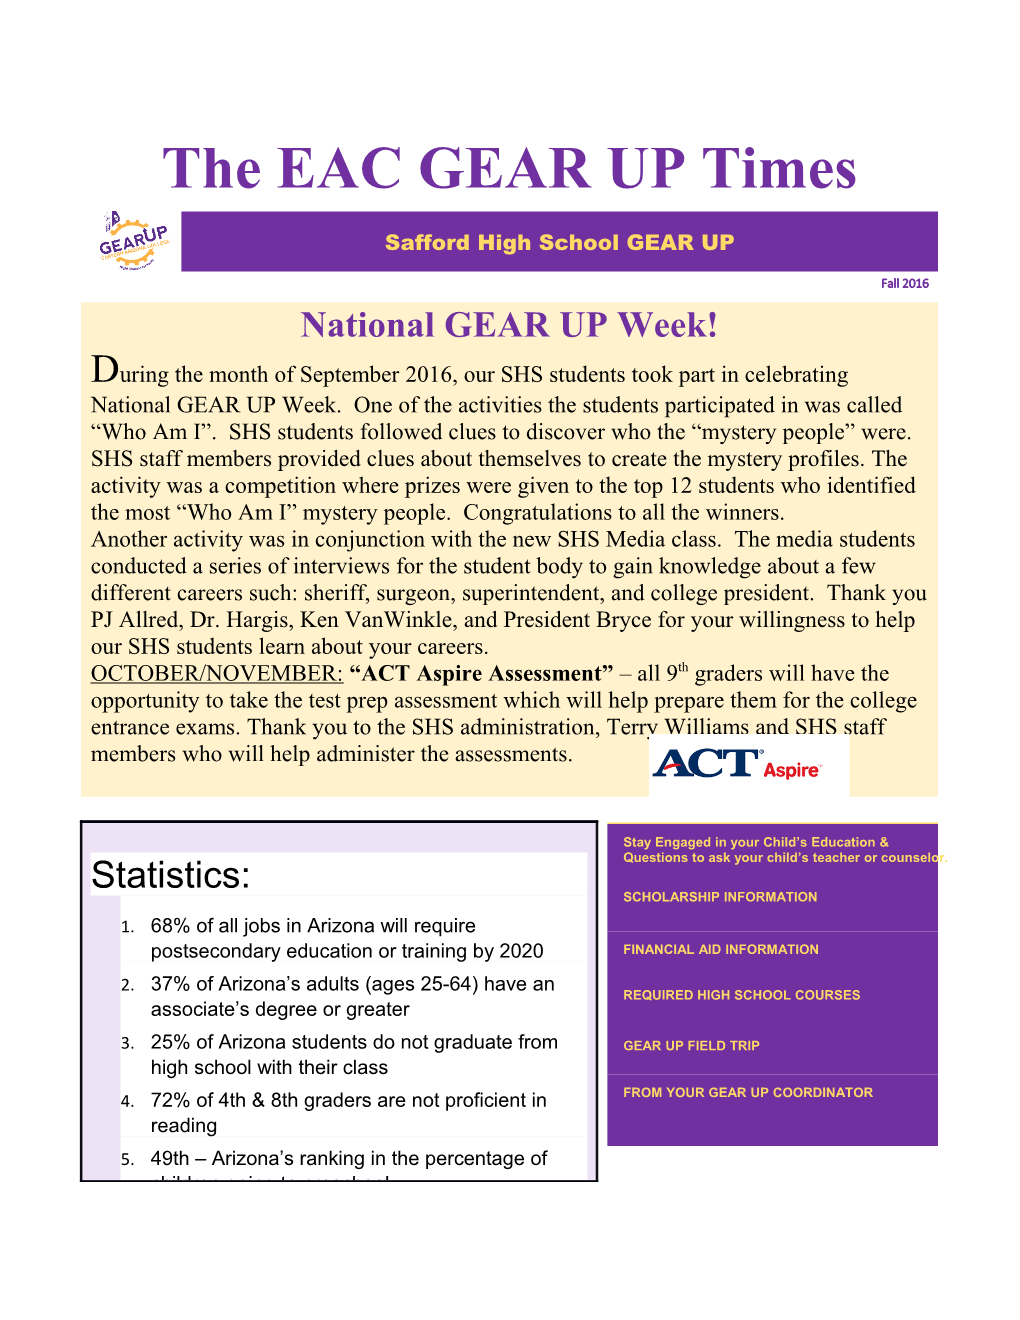 The EAC GEAR up Times